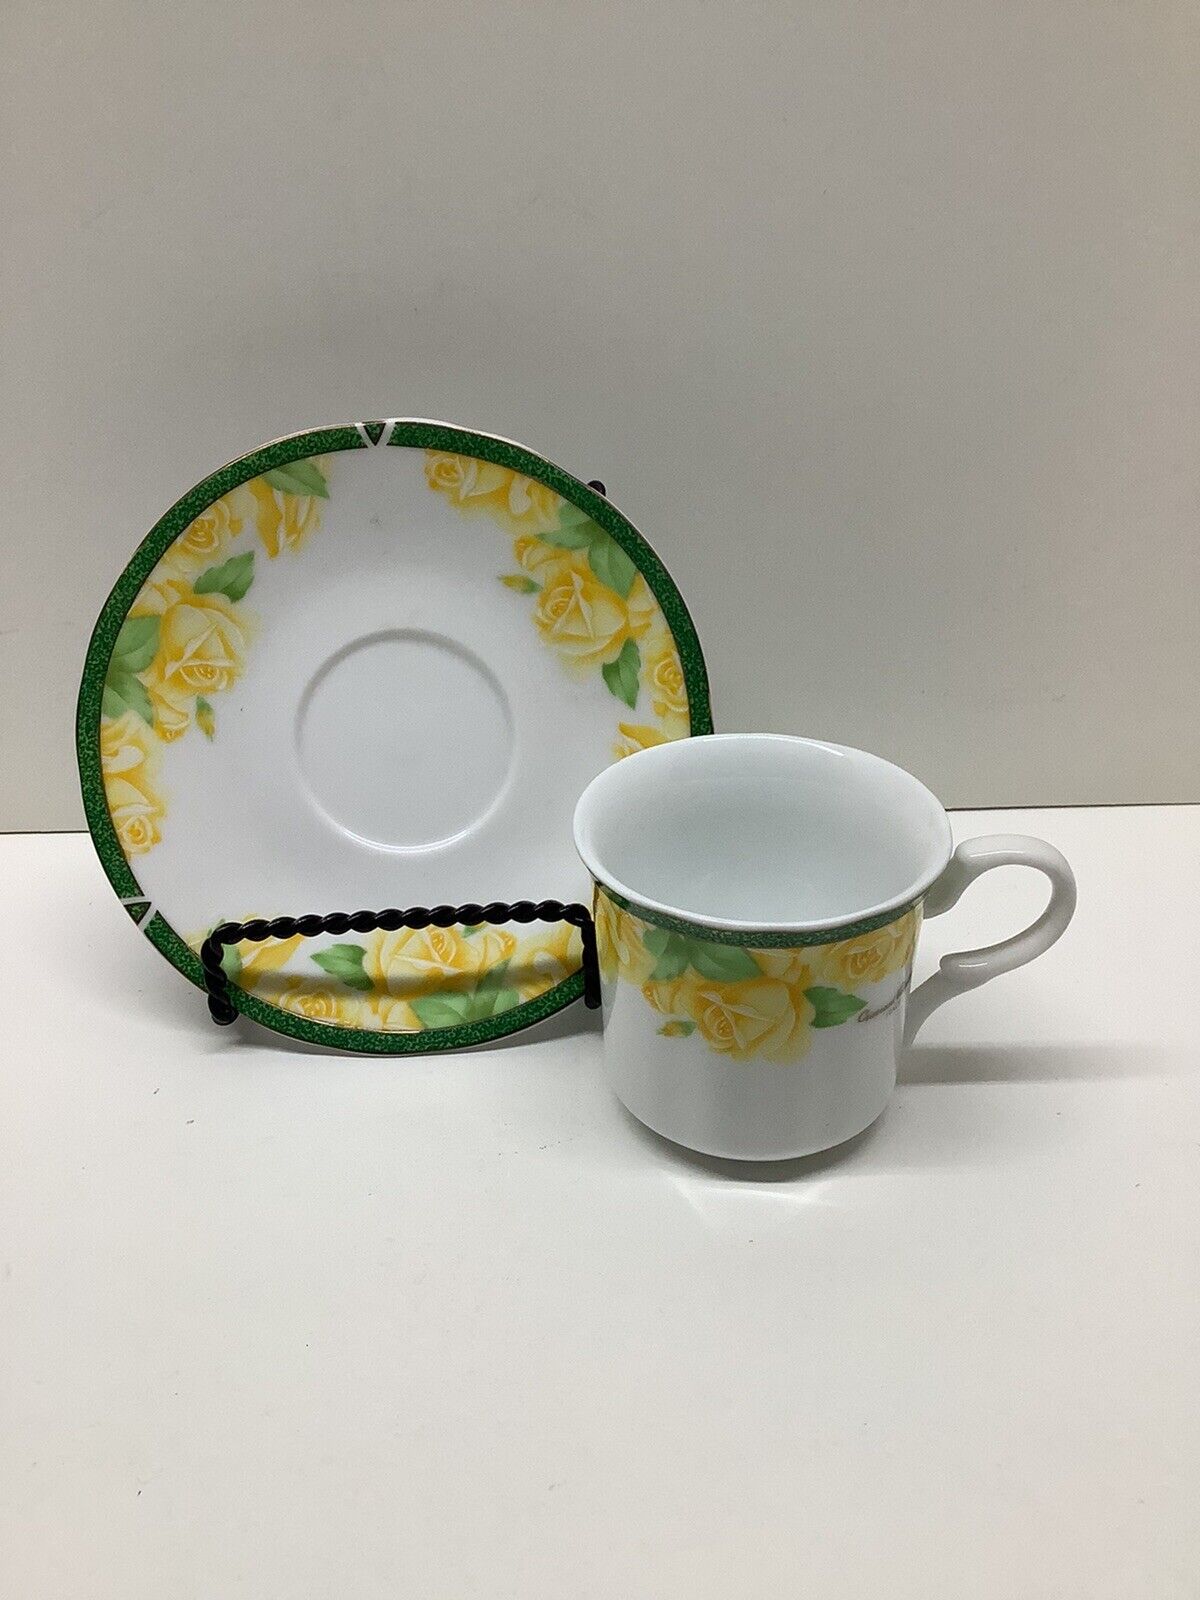 Giovanni Valentino yellow roses demitasse cup & saucer double gilt trim Italy